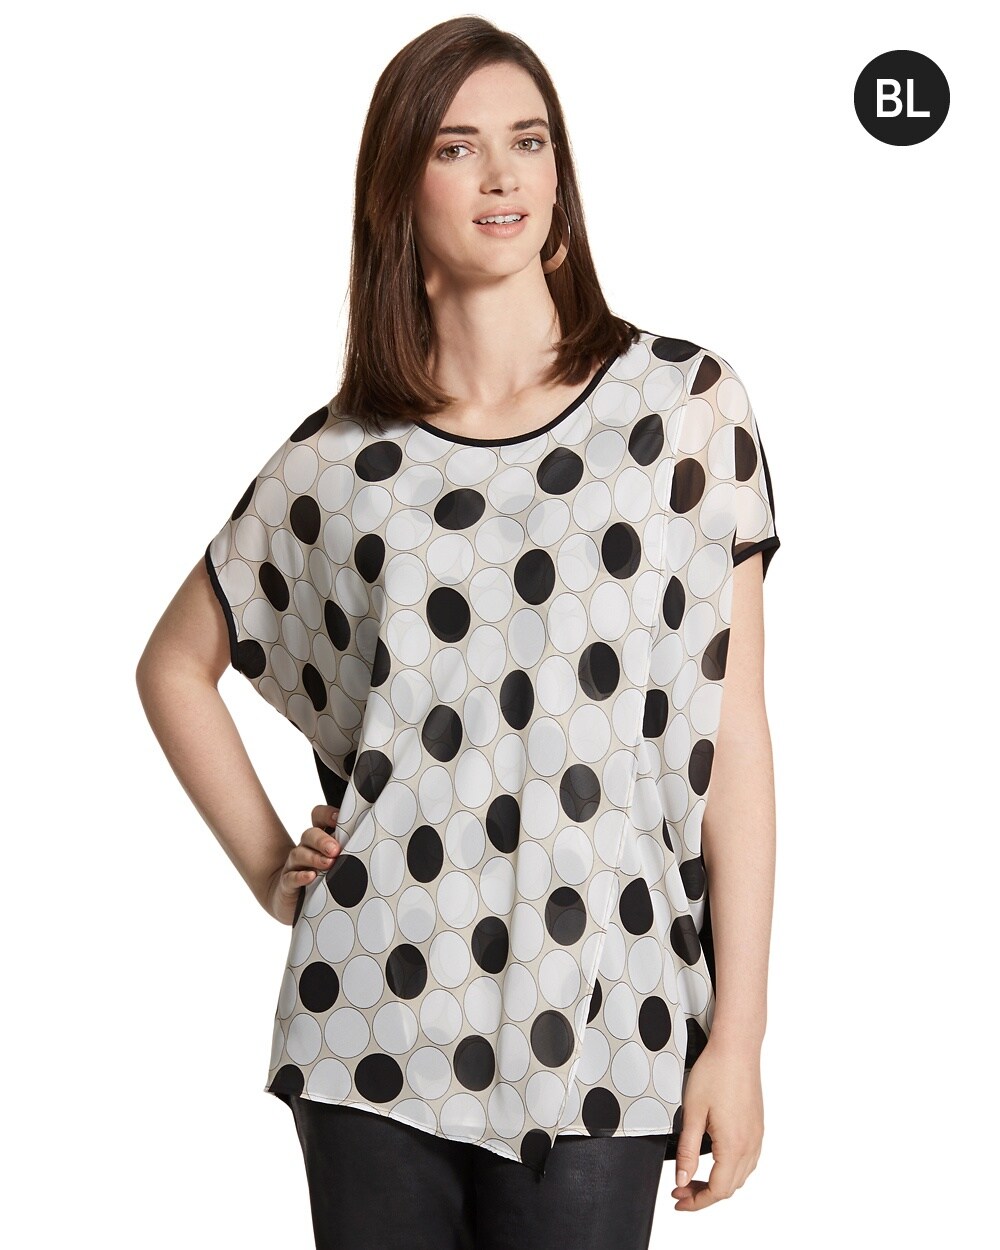 Black Label Layered Graphic Dot Top